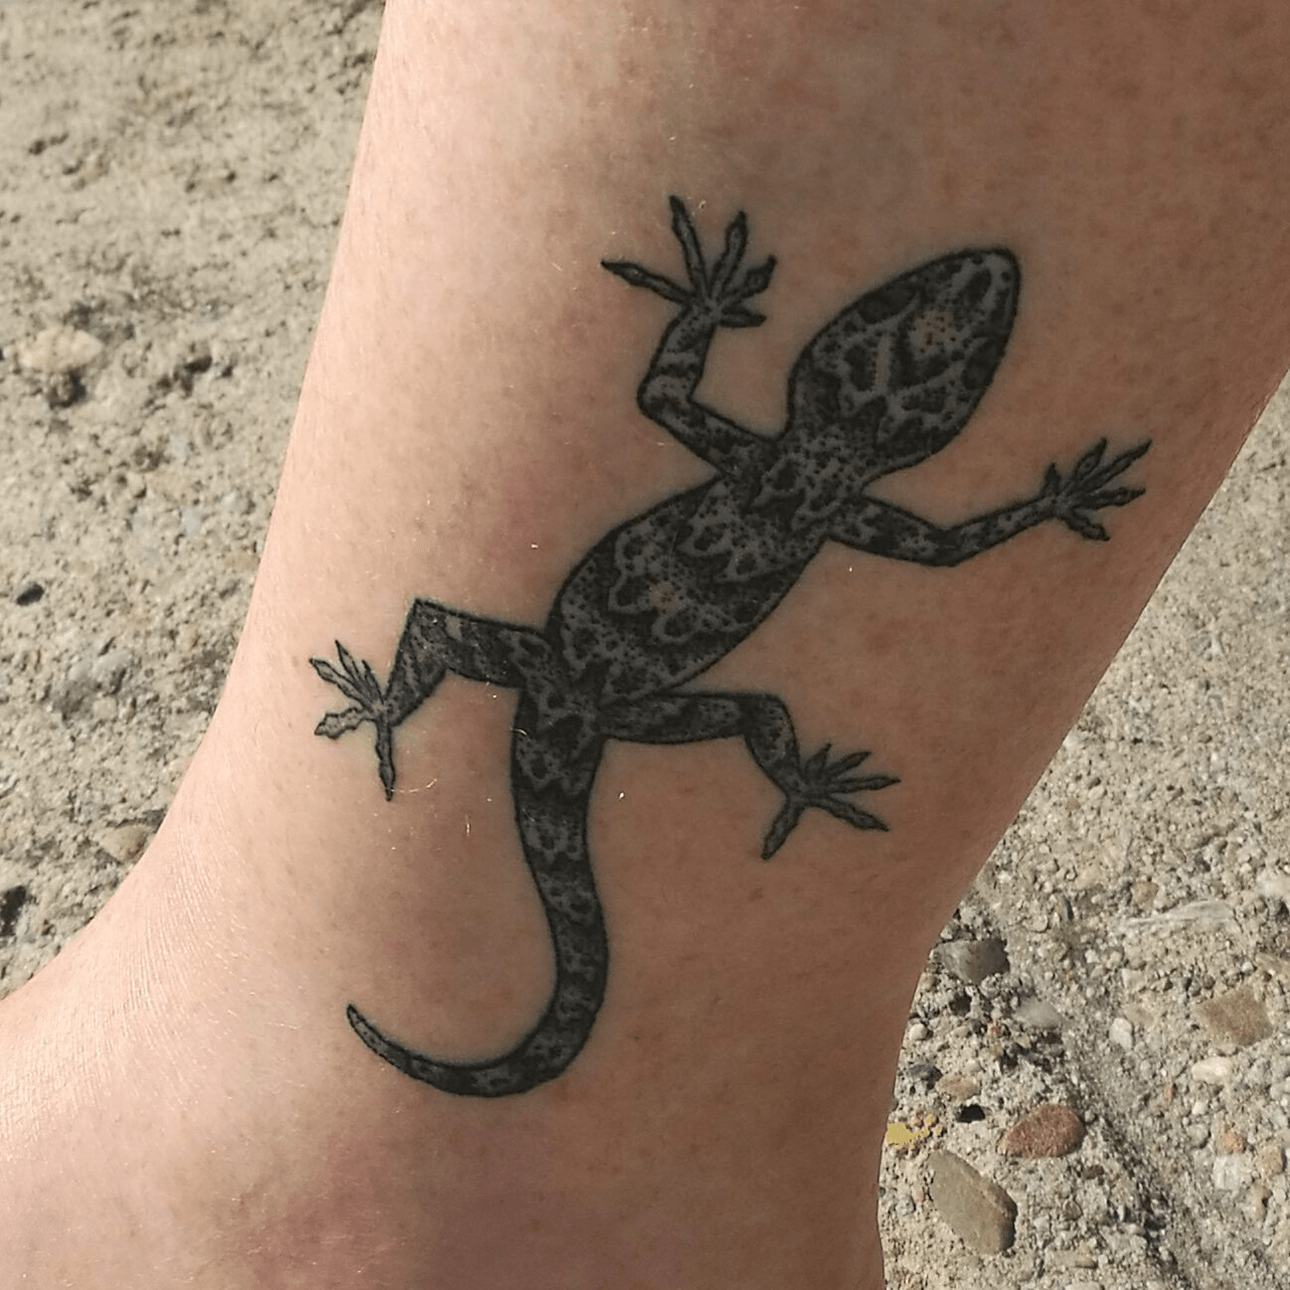 The most controversial gecko tattoo in the history of NZ politics, on the Araroa trail. Photo: C Wade-Brown